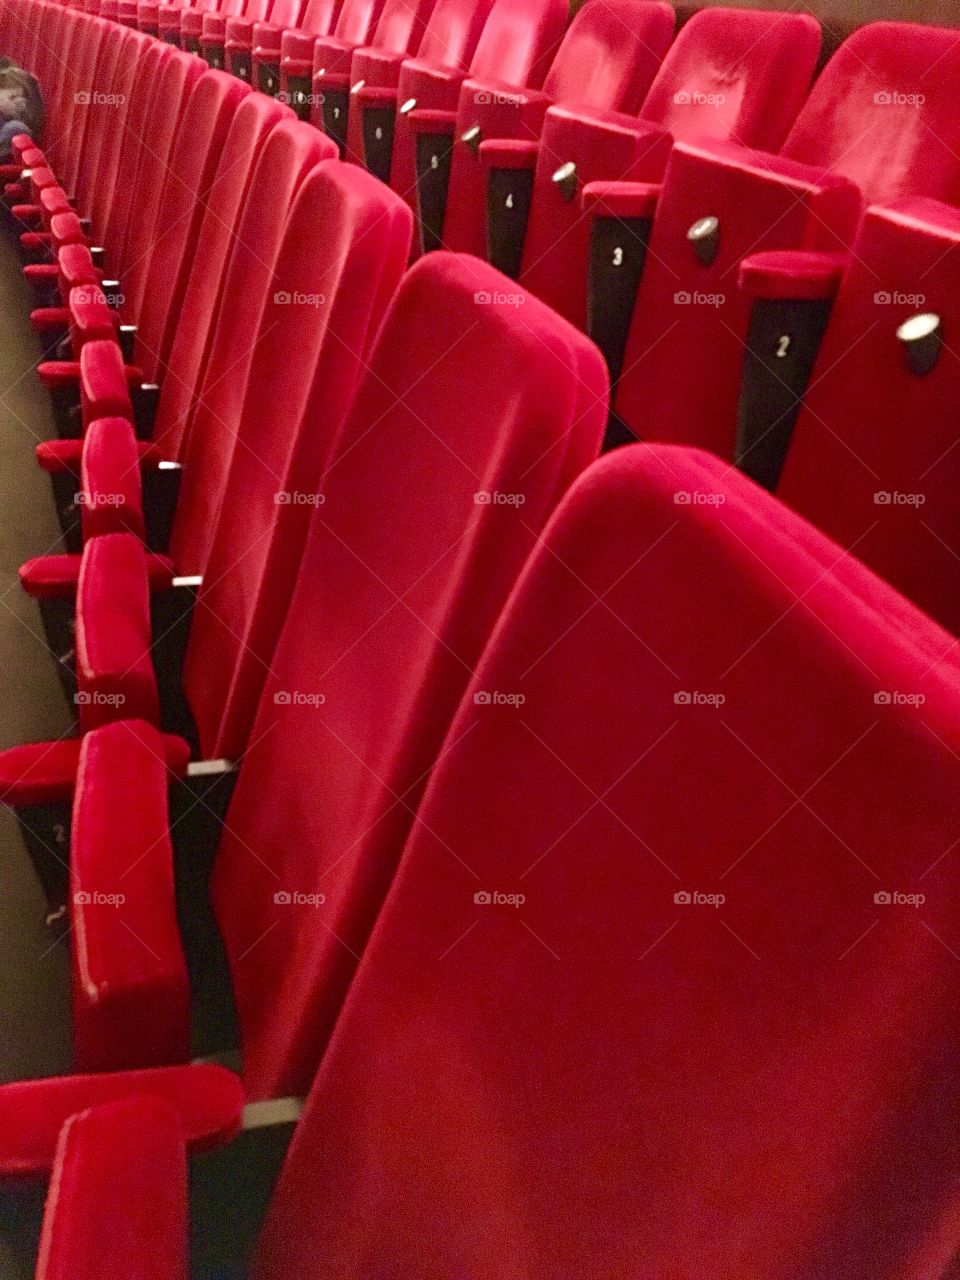 Red chairs in opera house